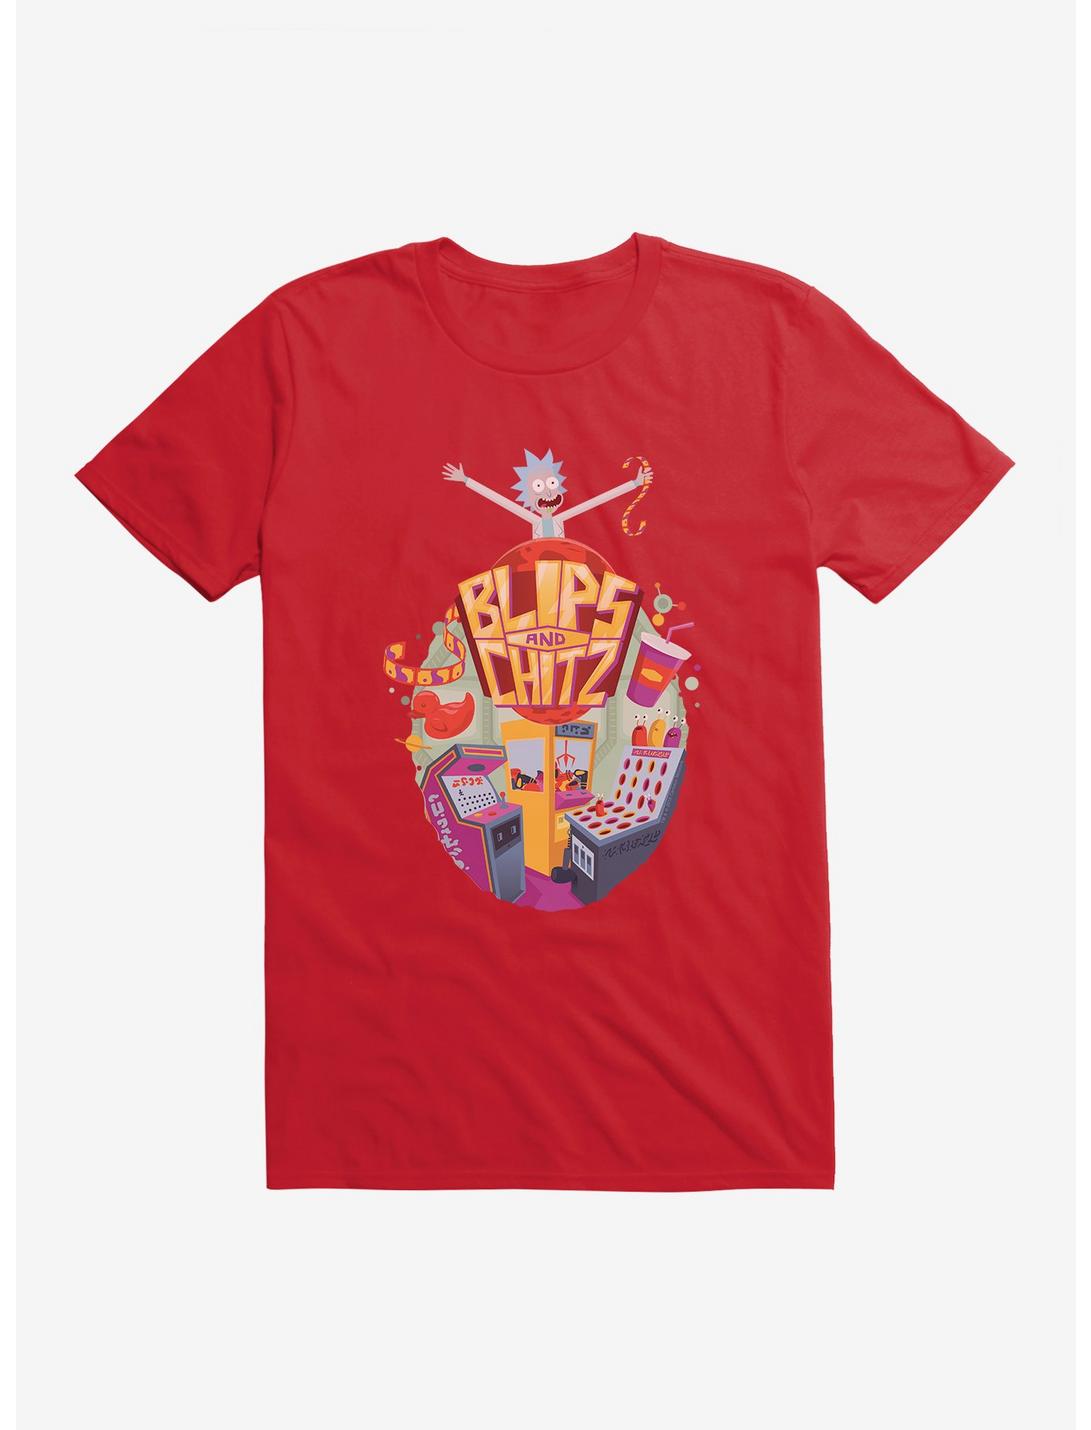 Rick and Morty Blips and Chitz T-Shirt, RED, hi-res